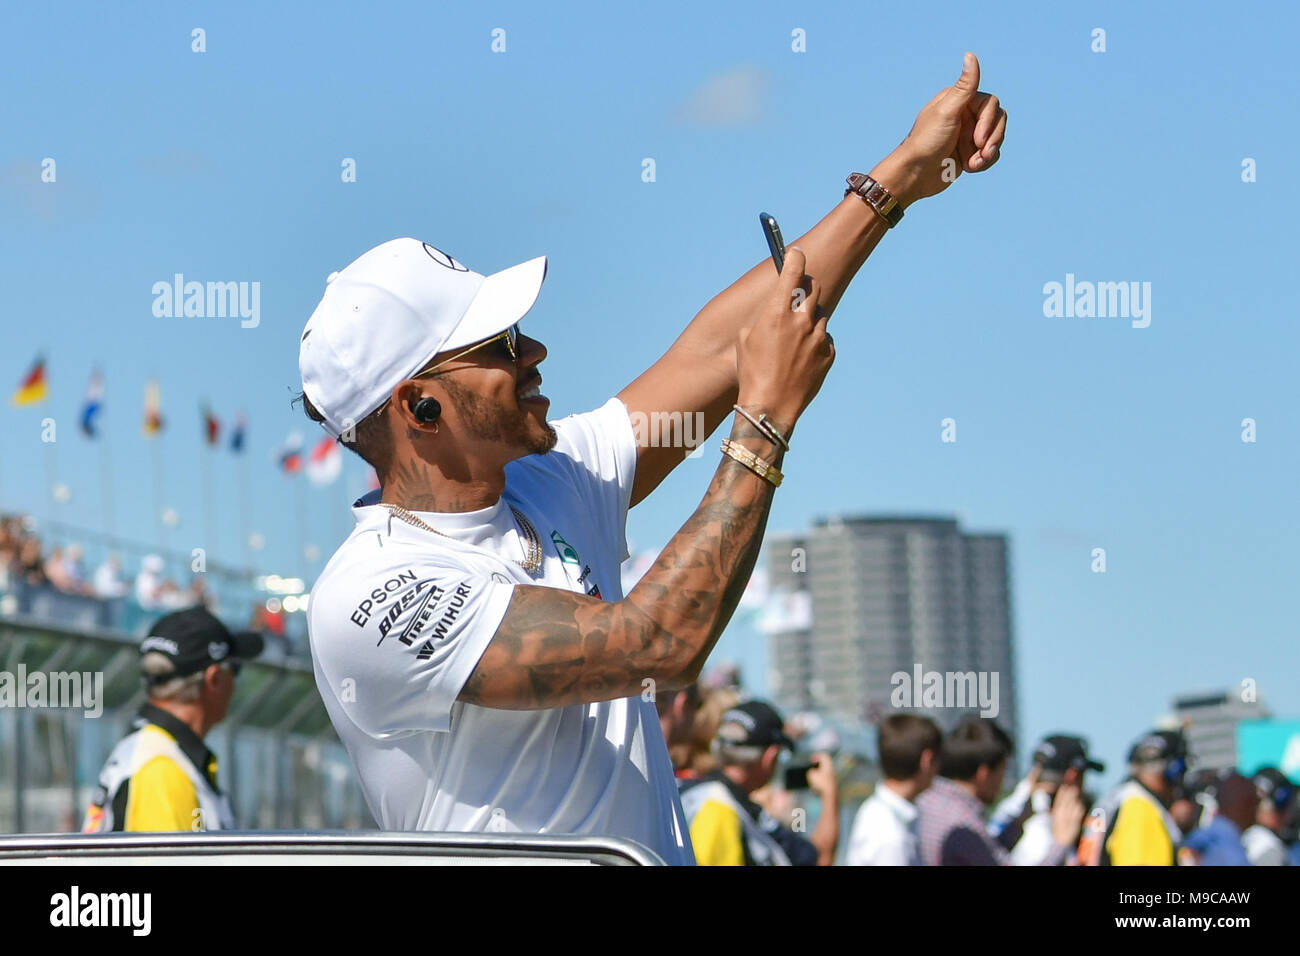 Albert Park, Melbourne, Australia. 25th Mar, 2018. Lewis Hamilton (GBR) #44 from the Mercedes AMG Petronas Motorsport team waves to the crowd during the drivers' parade at the 2018 Australian Formula One Grand Prix at Albert Park, Melbourne, Australia. Sydney Low/Cal Sport Media/Alamy Live News Stock Photo